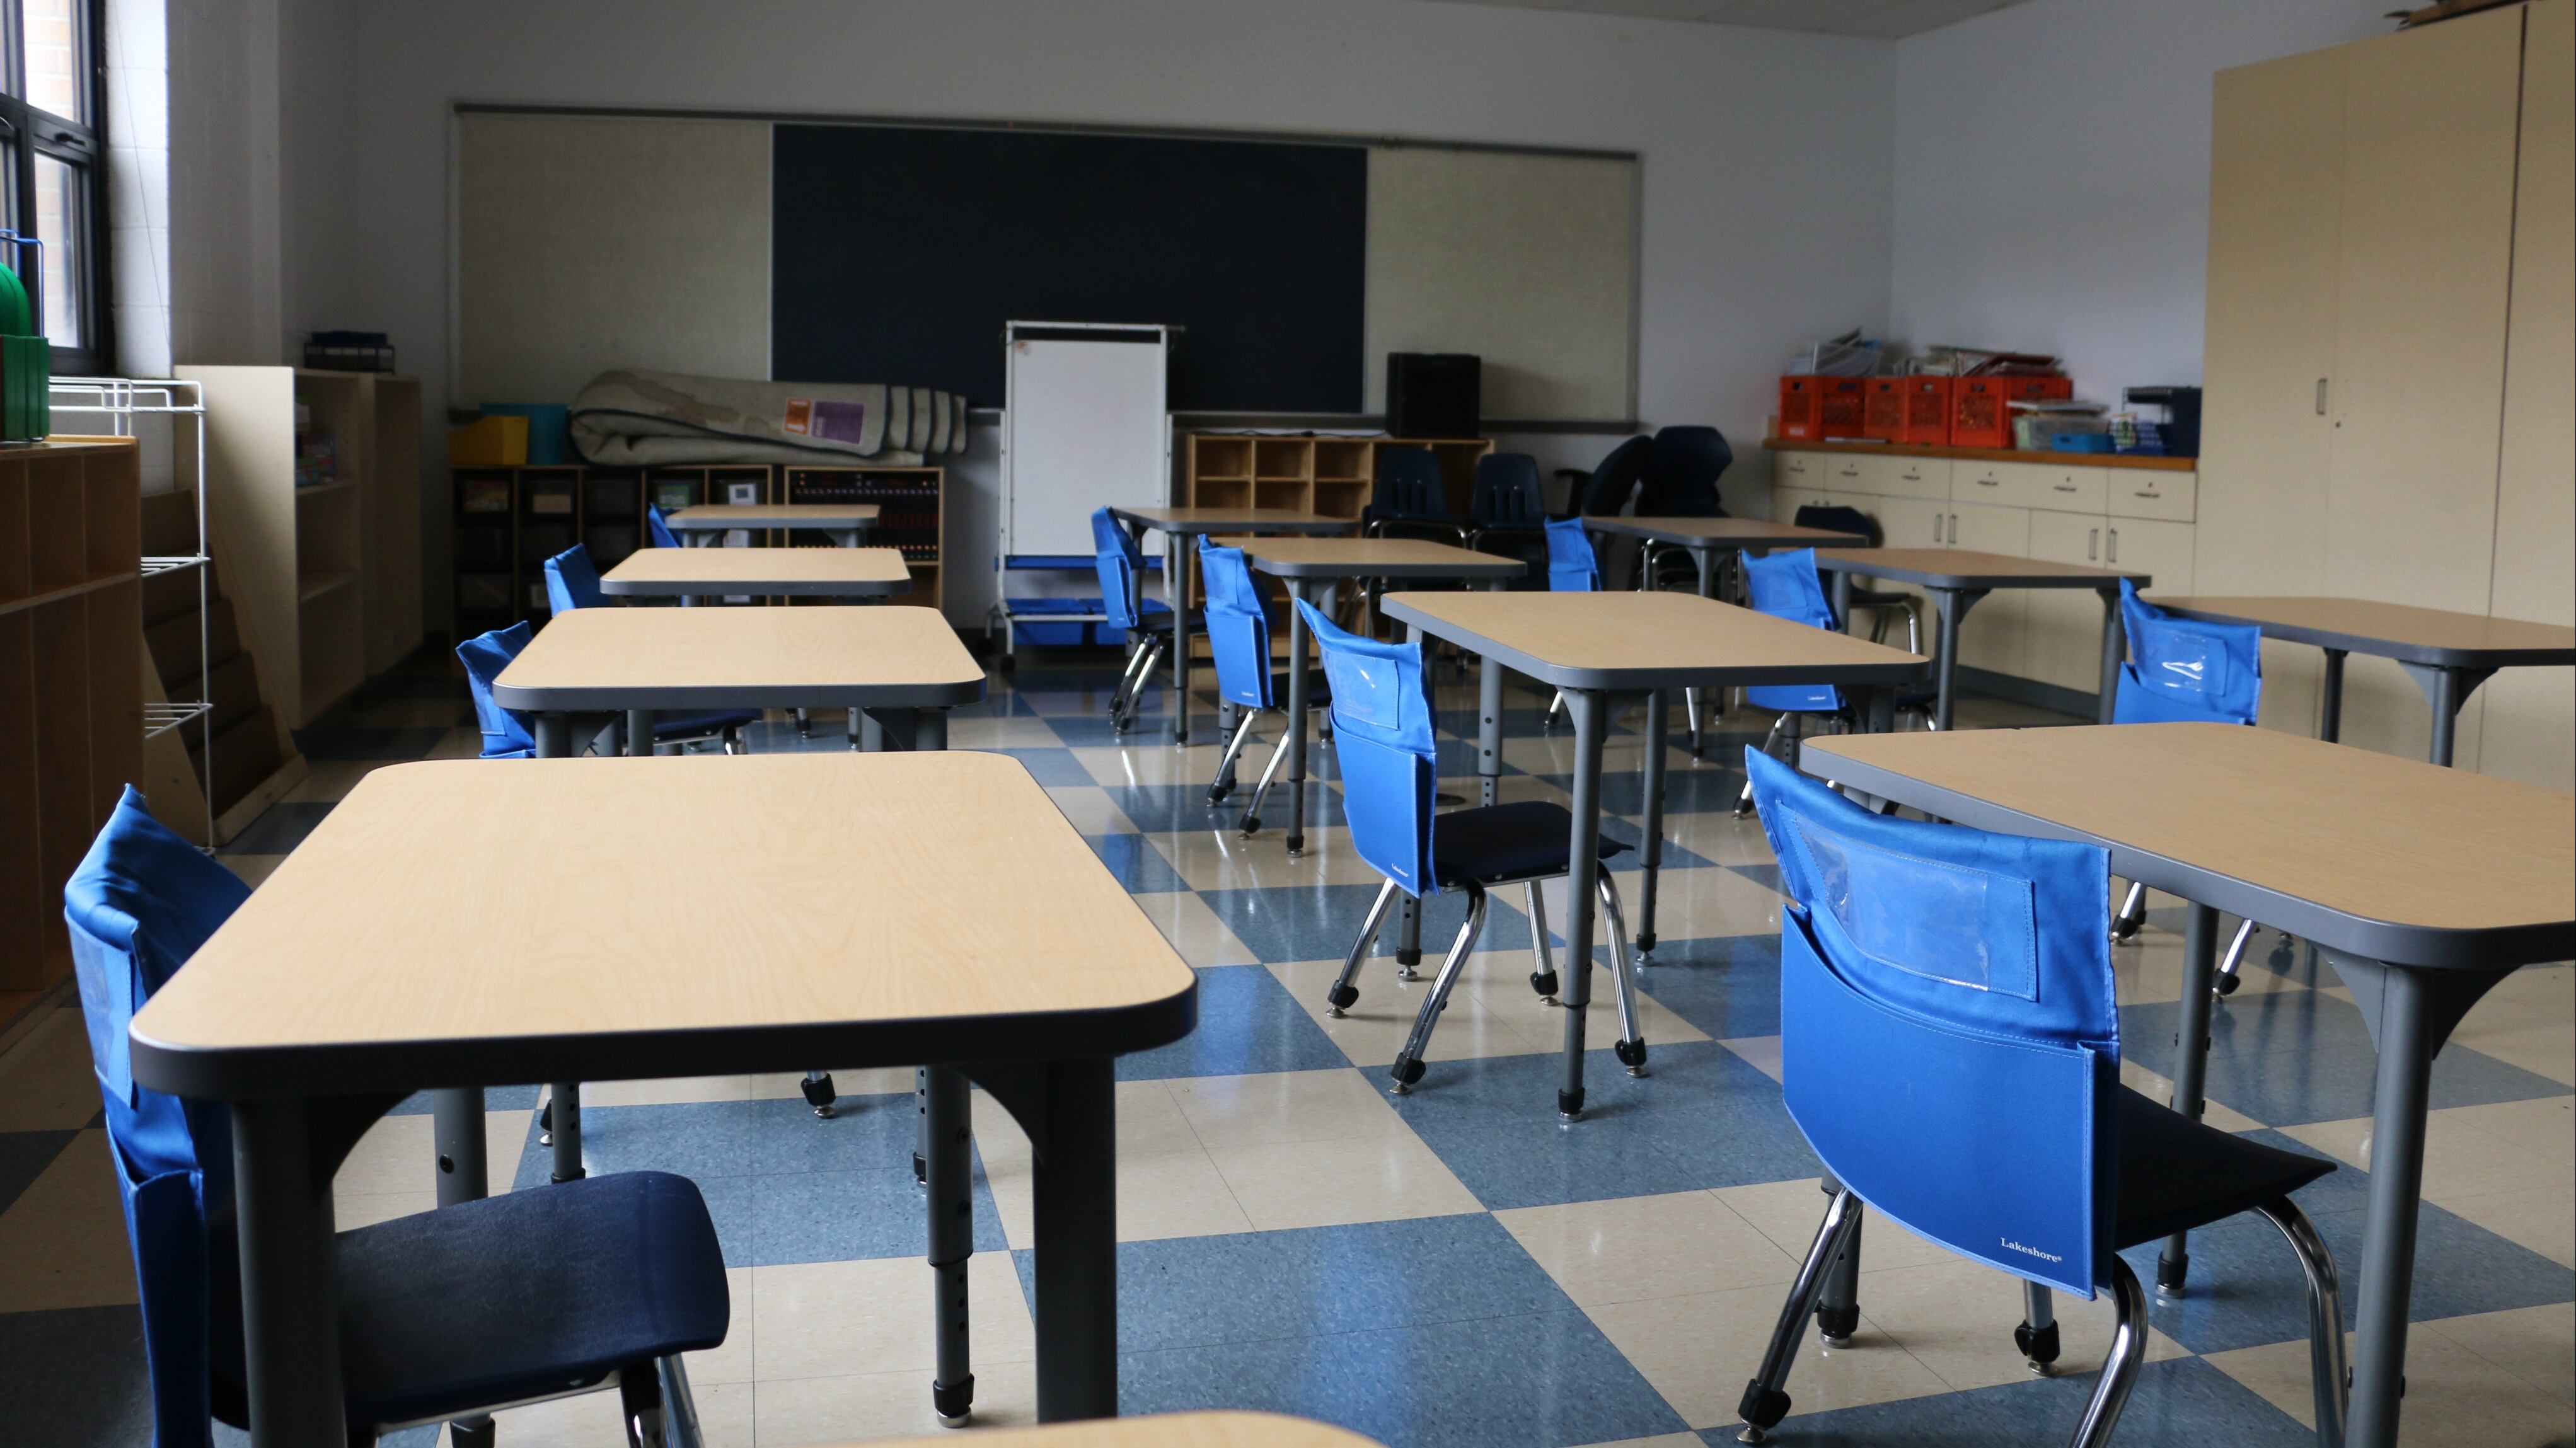 A classroom with blue chairs sits empty.